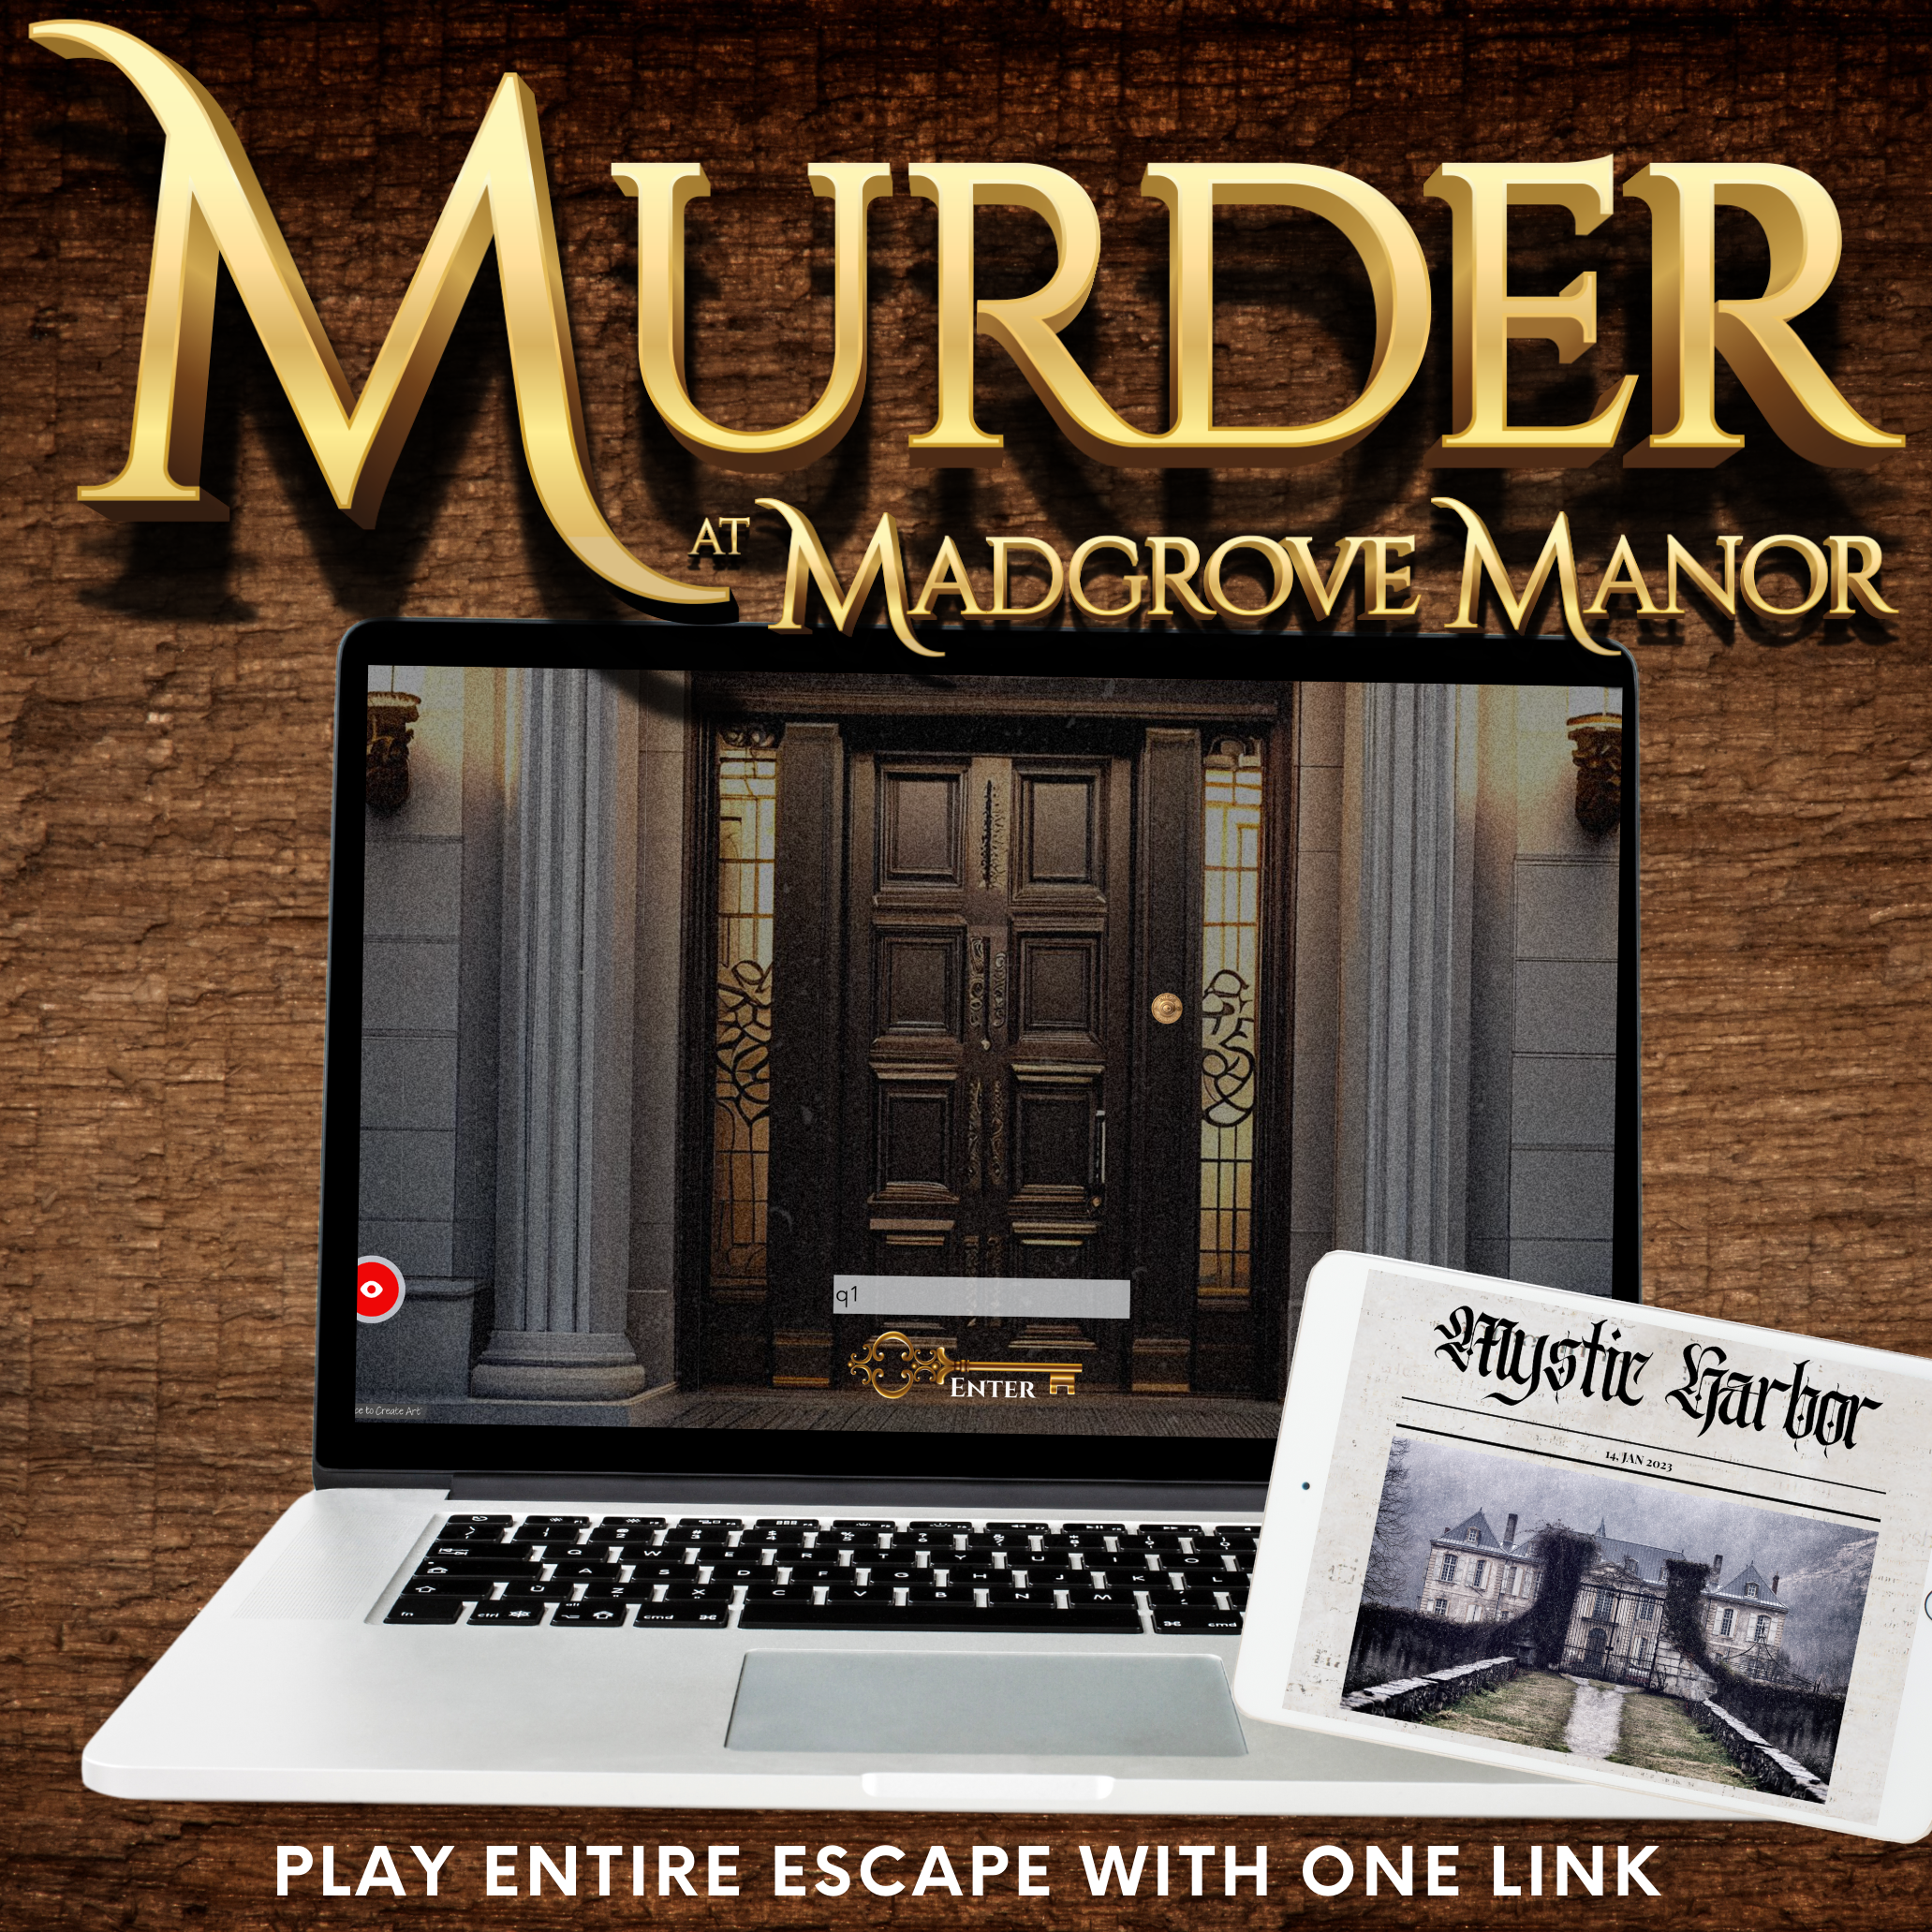 Virtual Murder Mystery Games to Try Online in 2023